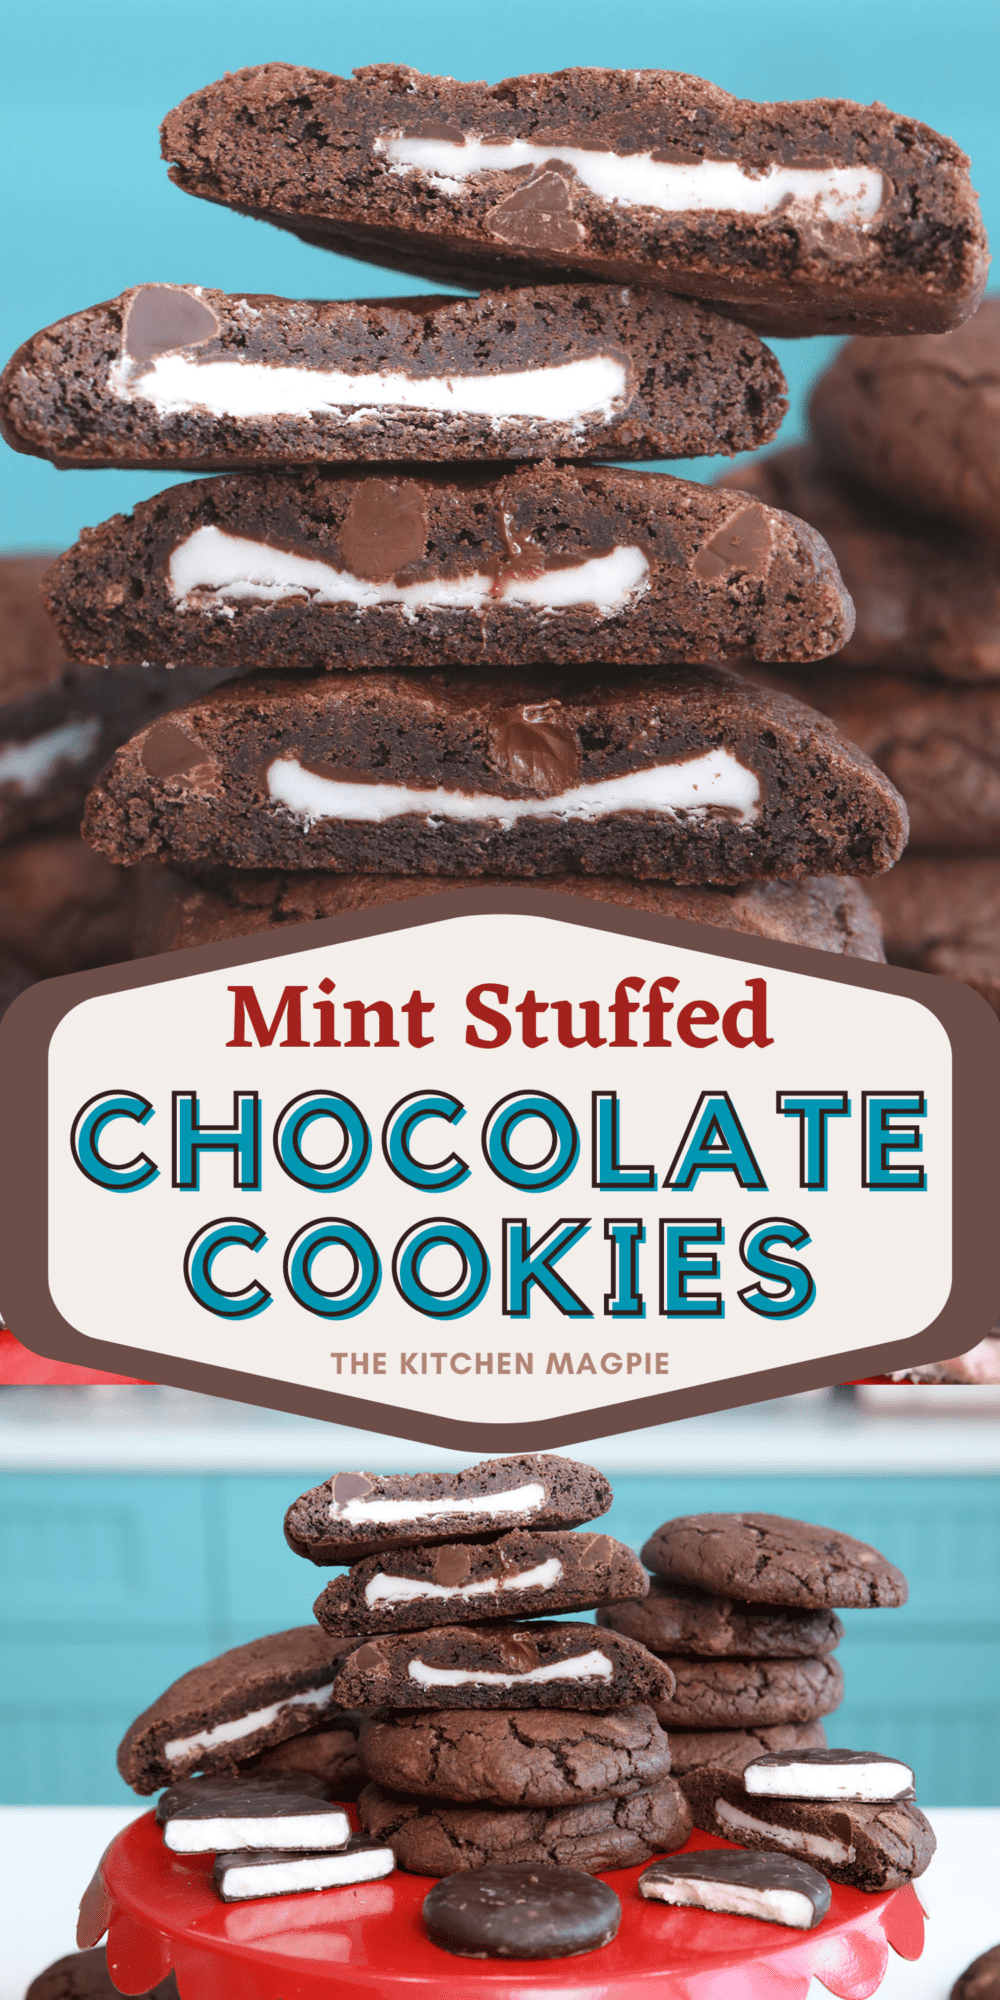 Double mint stuffed chocolate chip cookies stuffed with York peppermint patties. You just cannot imagine how good these are! 